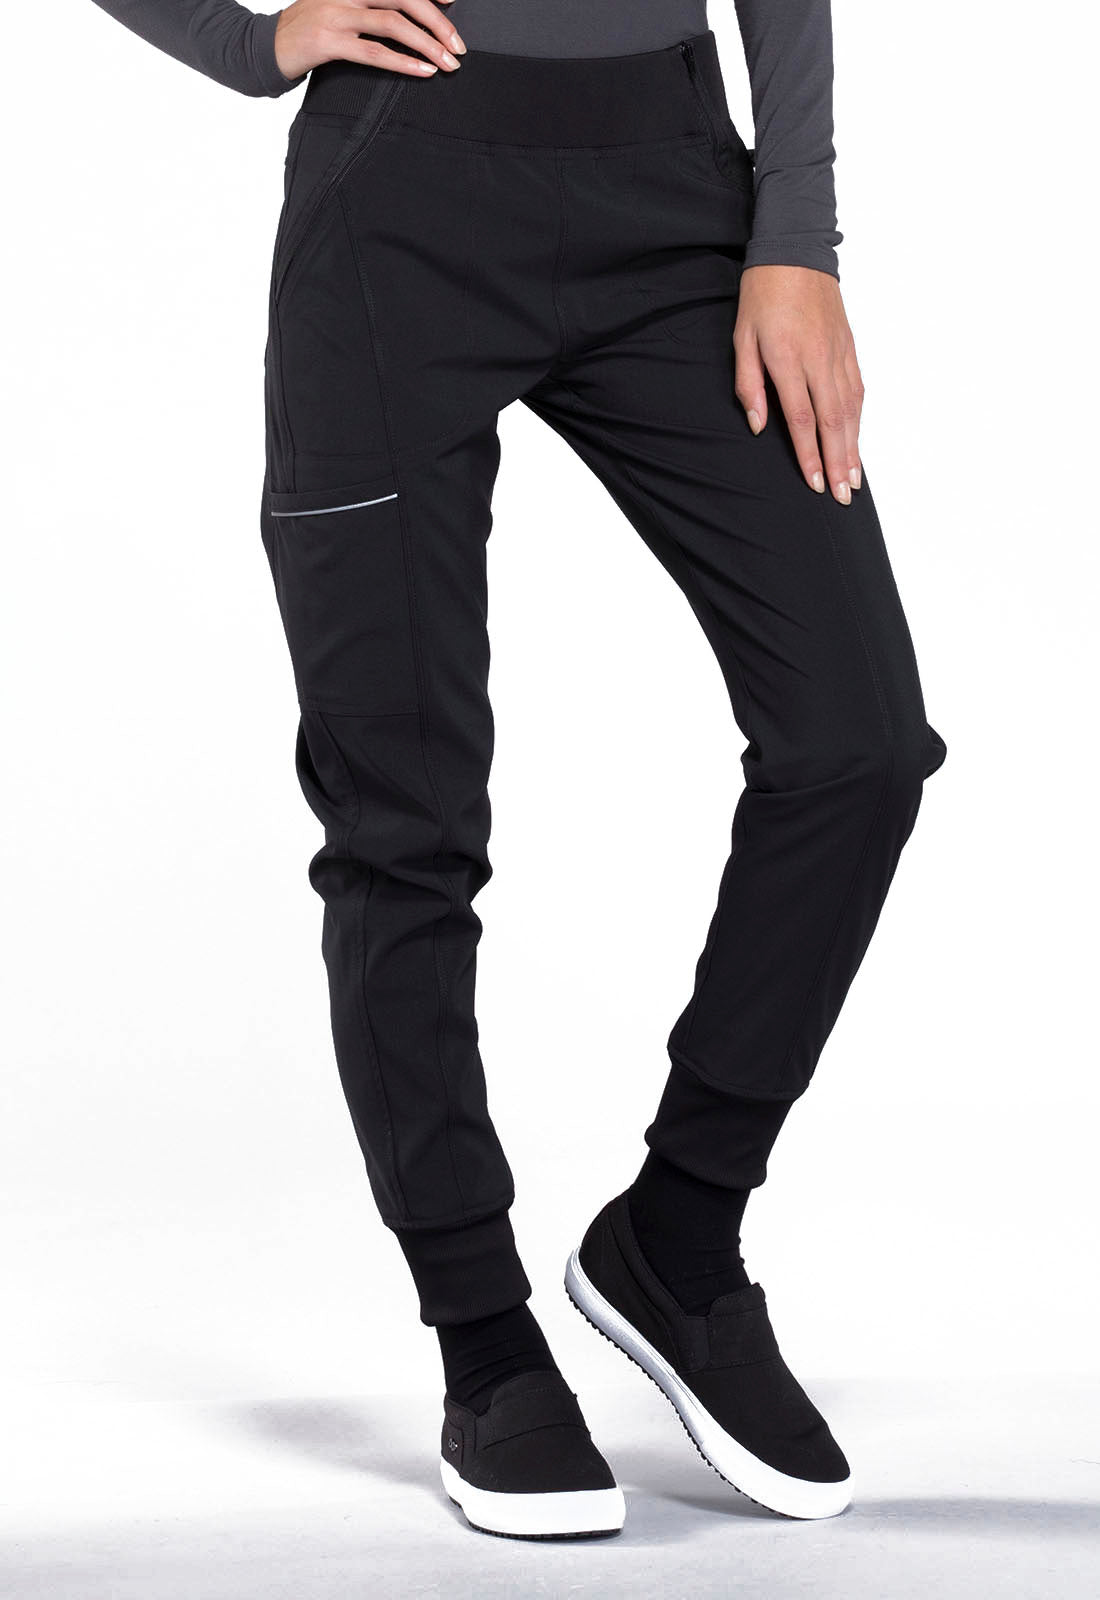 Tall Women's Joggers, Tall Tracksuit Bottoms